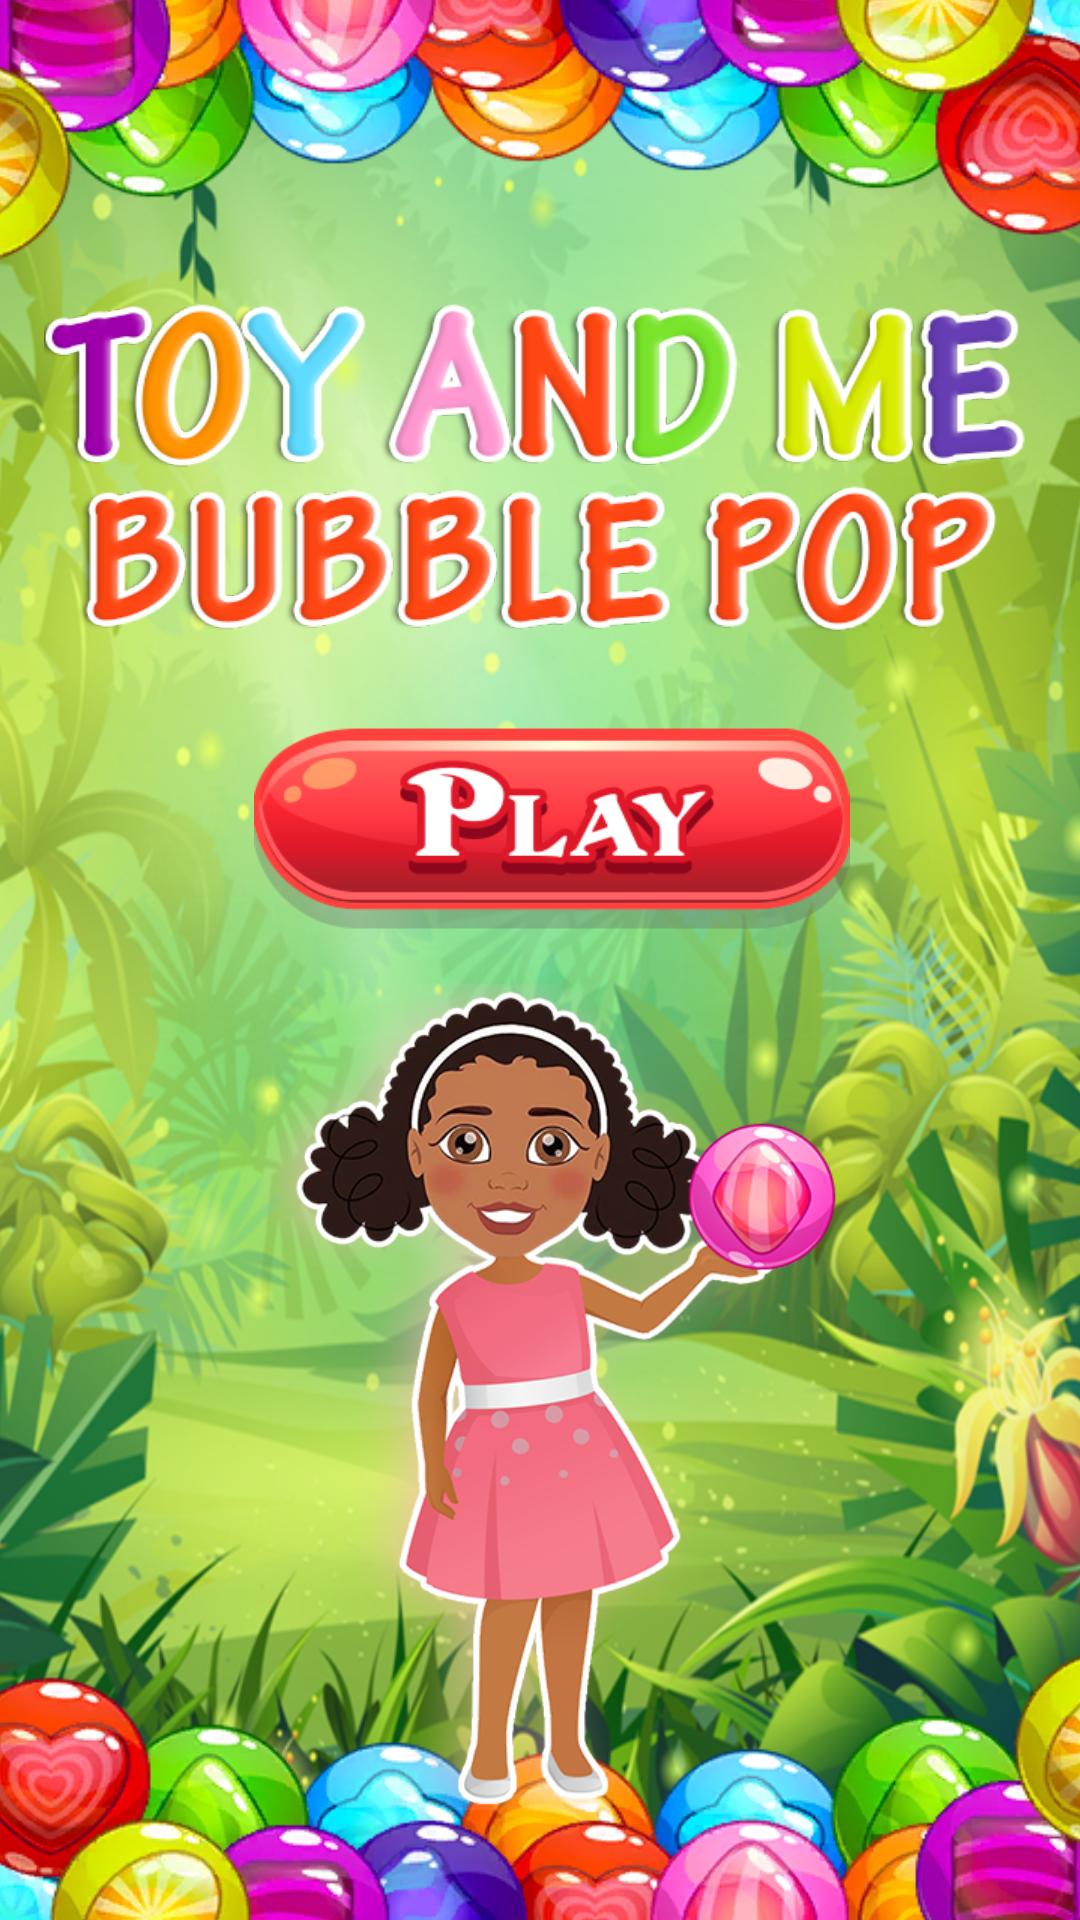 Toys And Me - Pop Match 3 Bubble for Android - APK Download